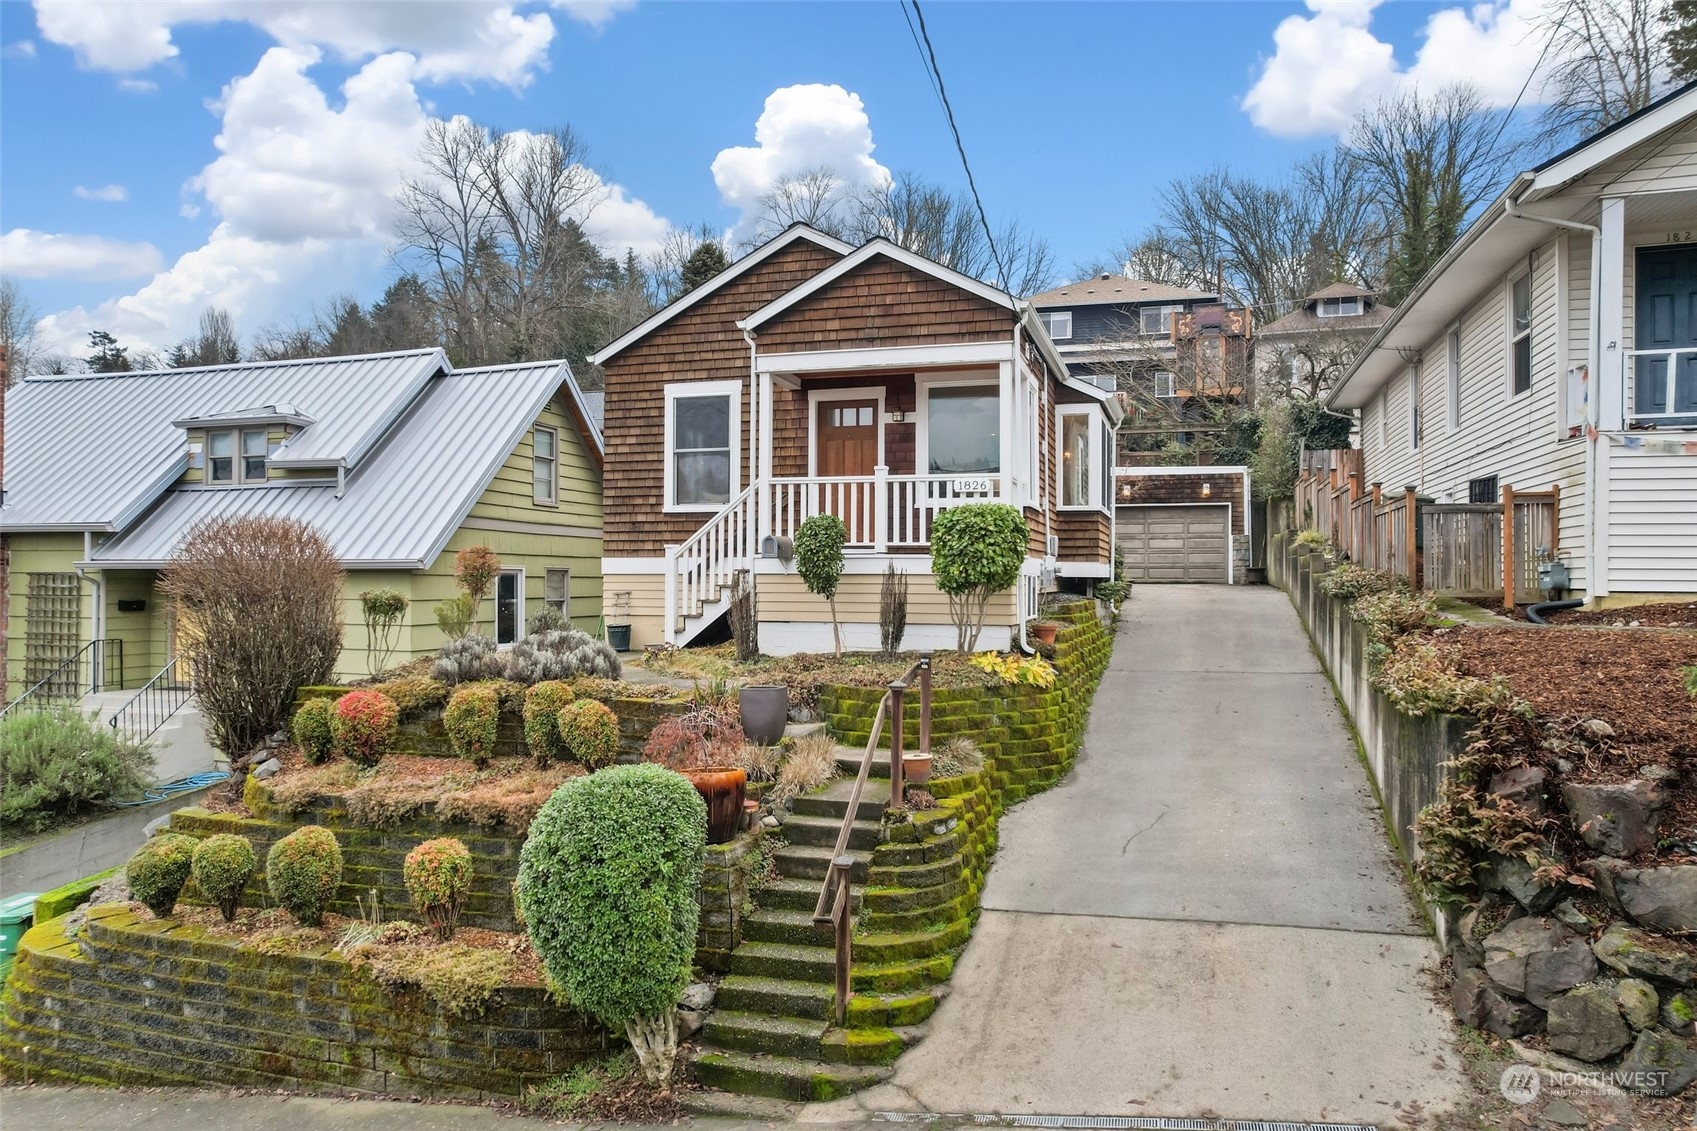 Seattle - Capitol Hill/Madrona Park (98122), WA Real Estate Housing Market & Trends | Coldwell Banker